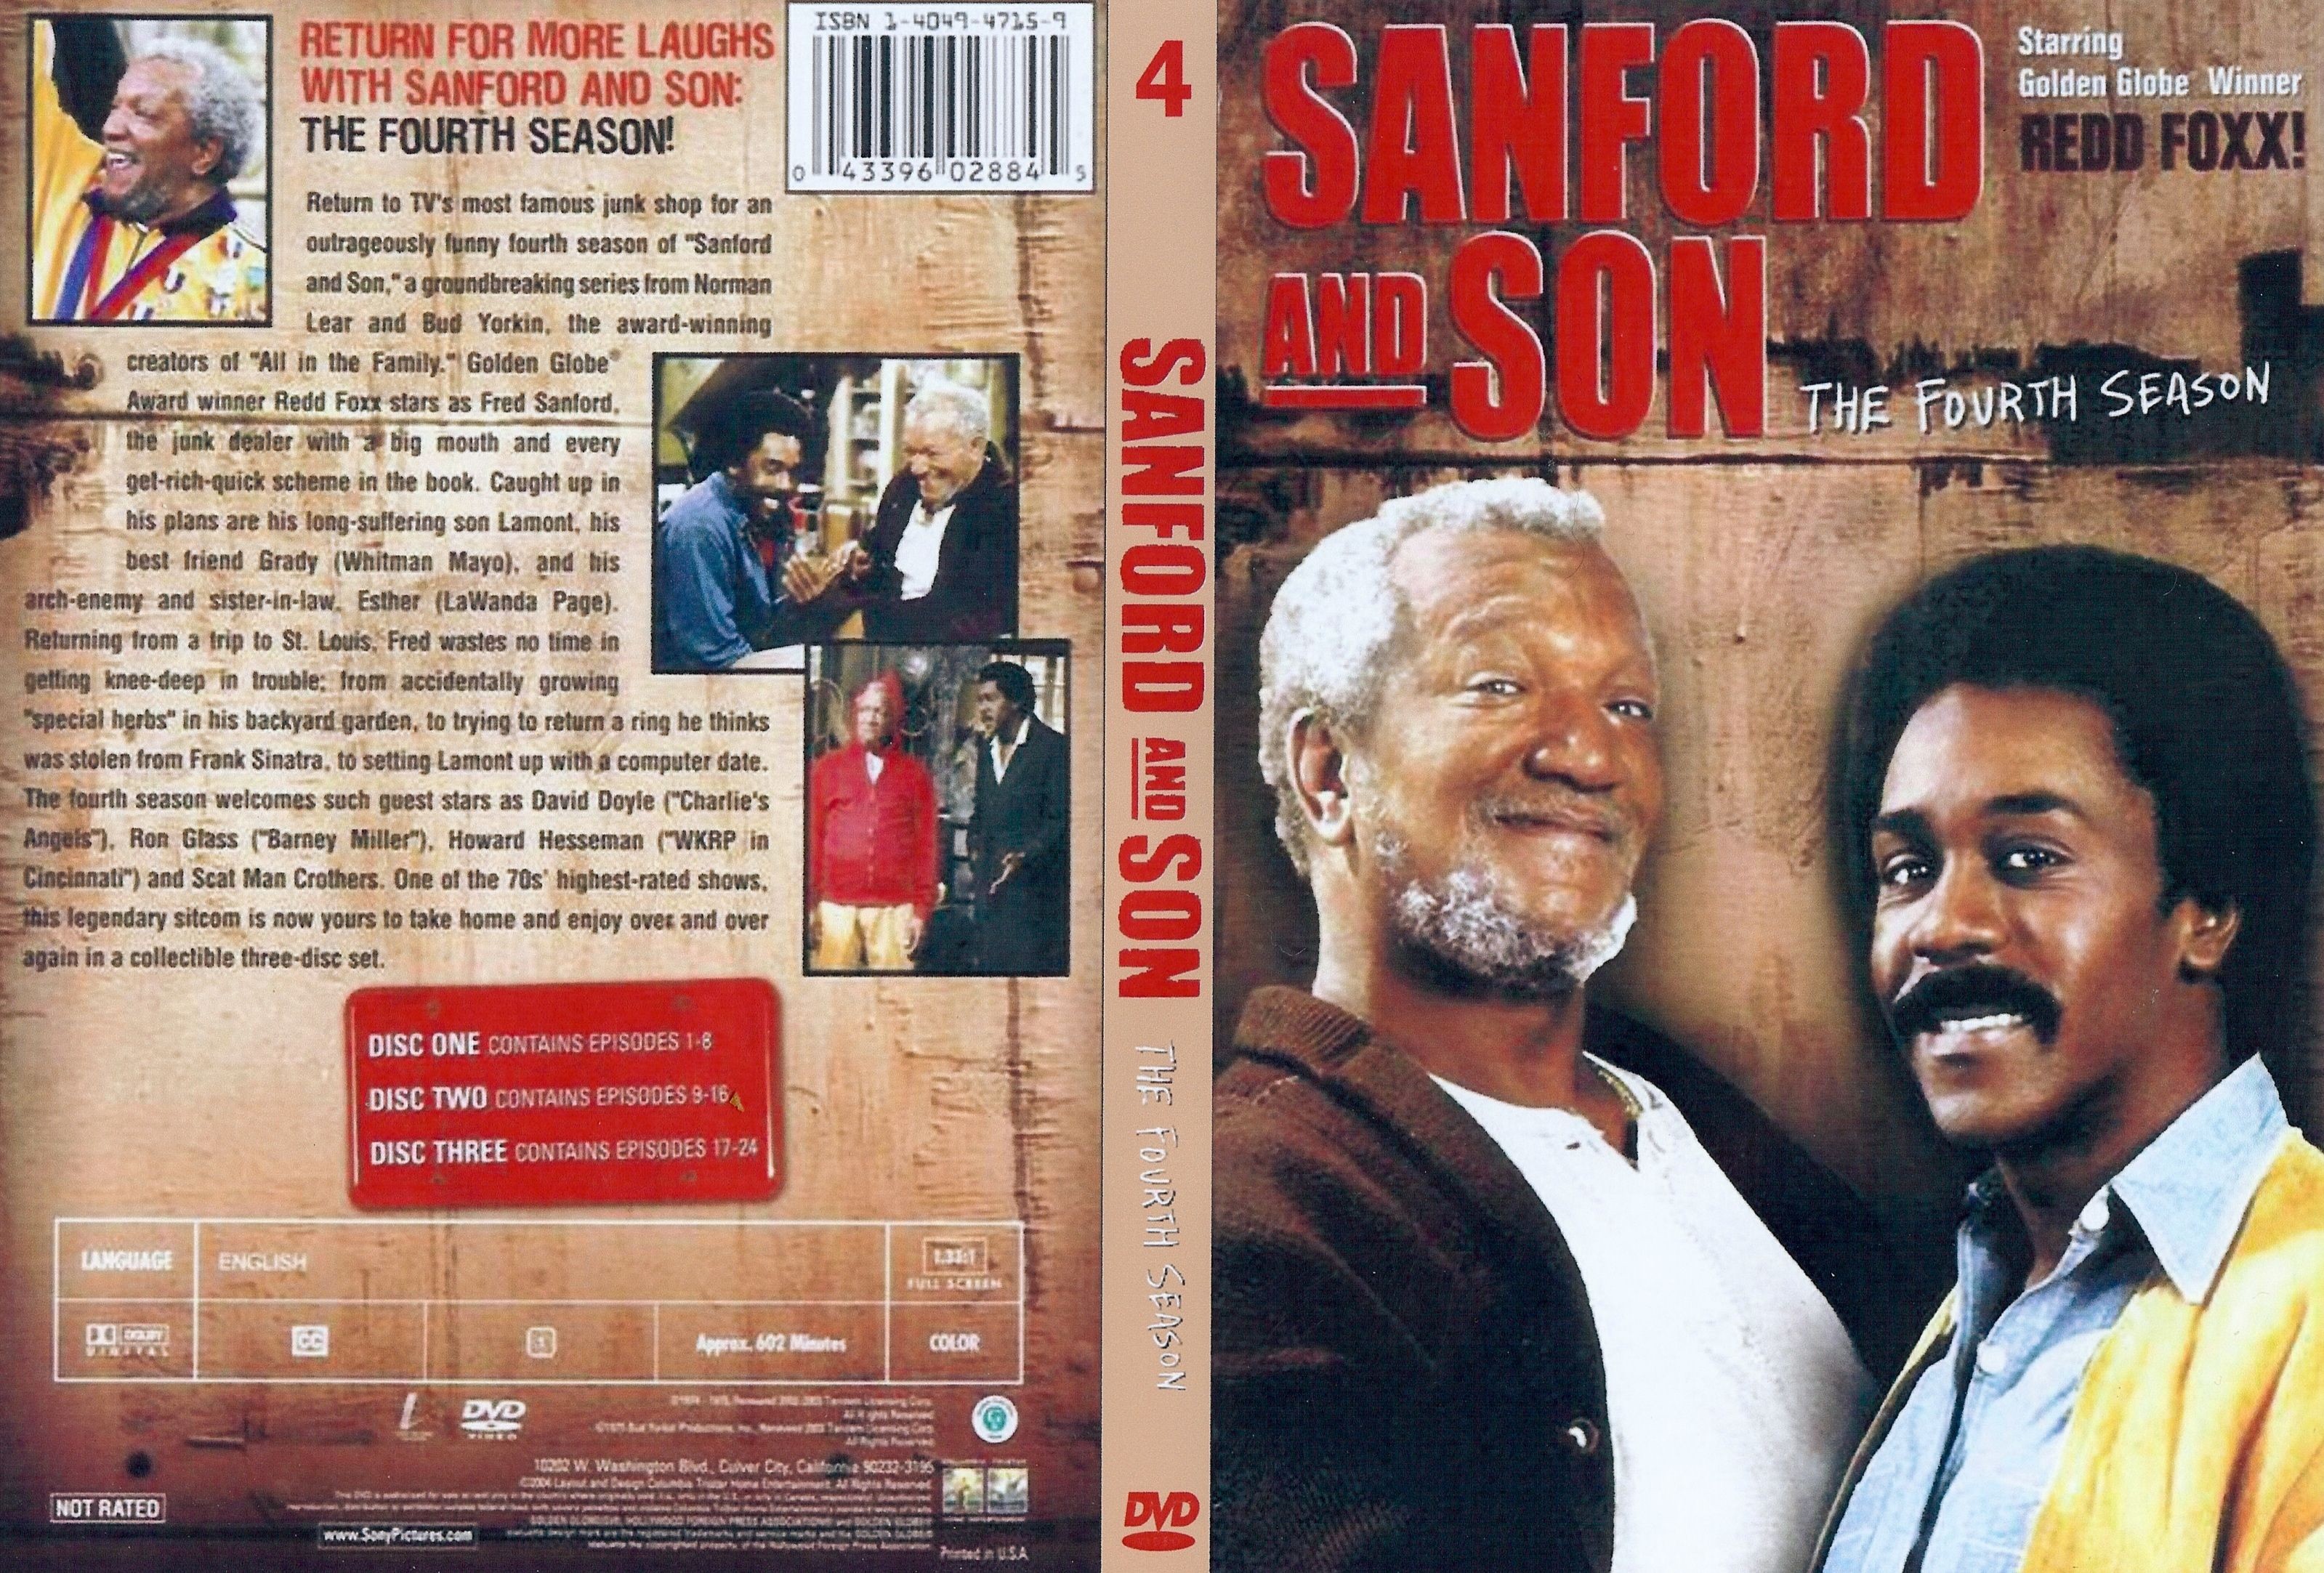 Sanford And Son Image Crazy Gallery